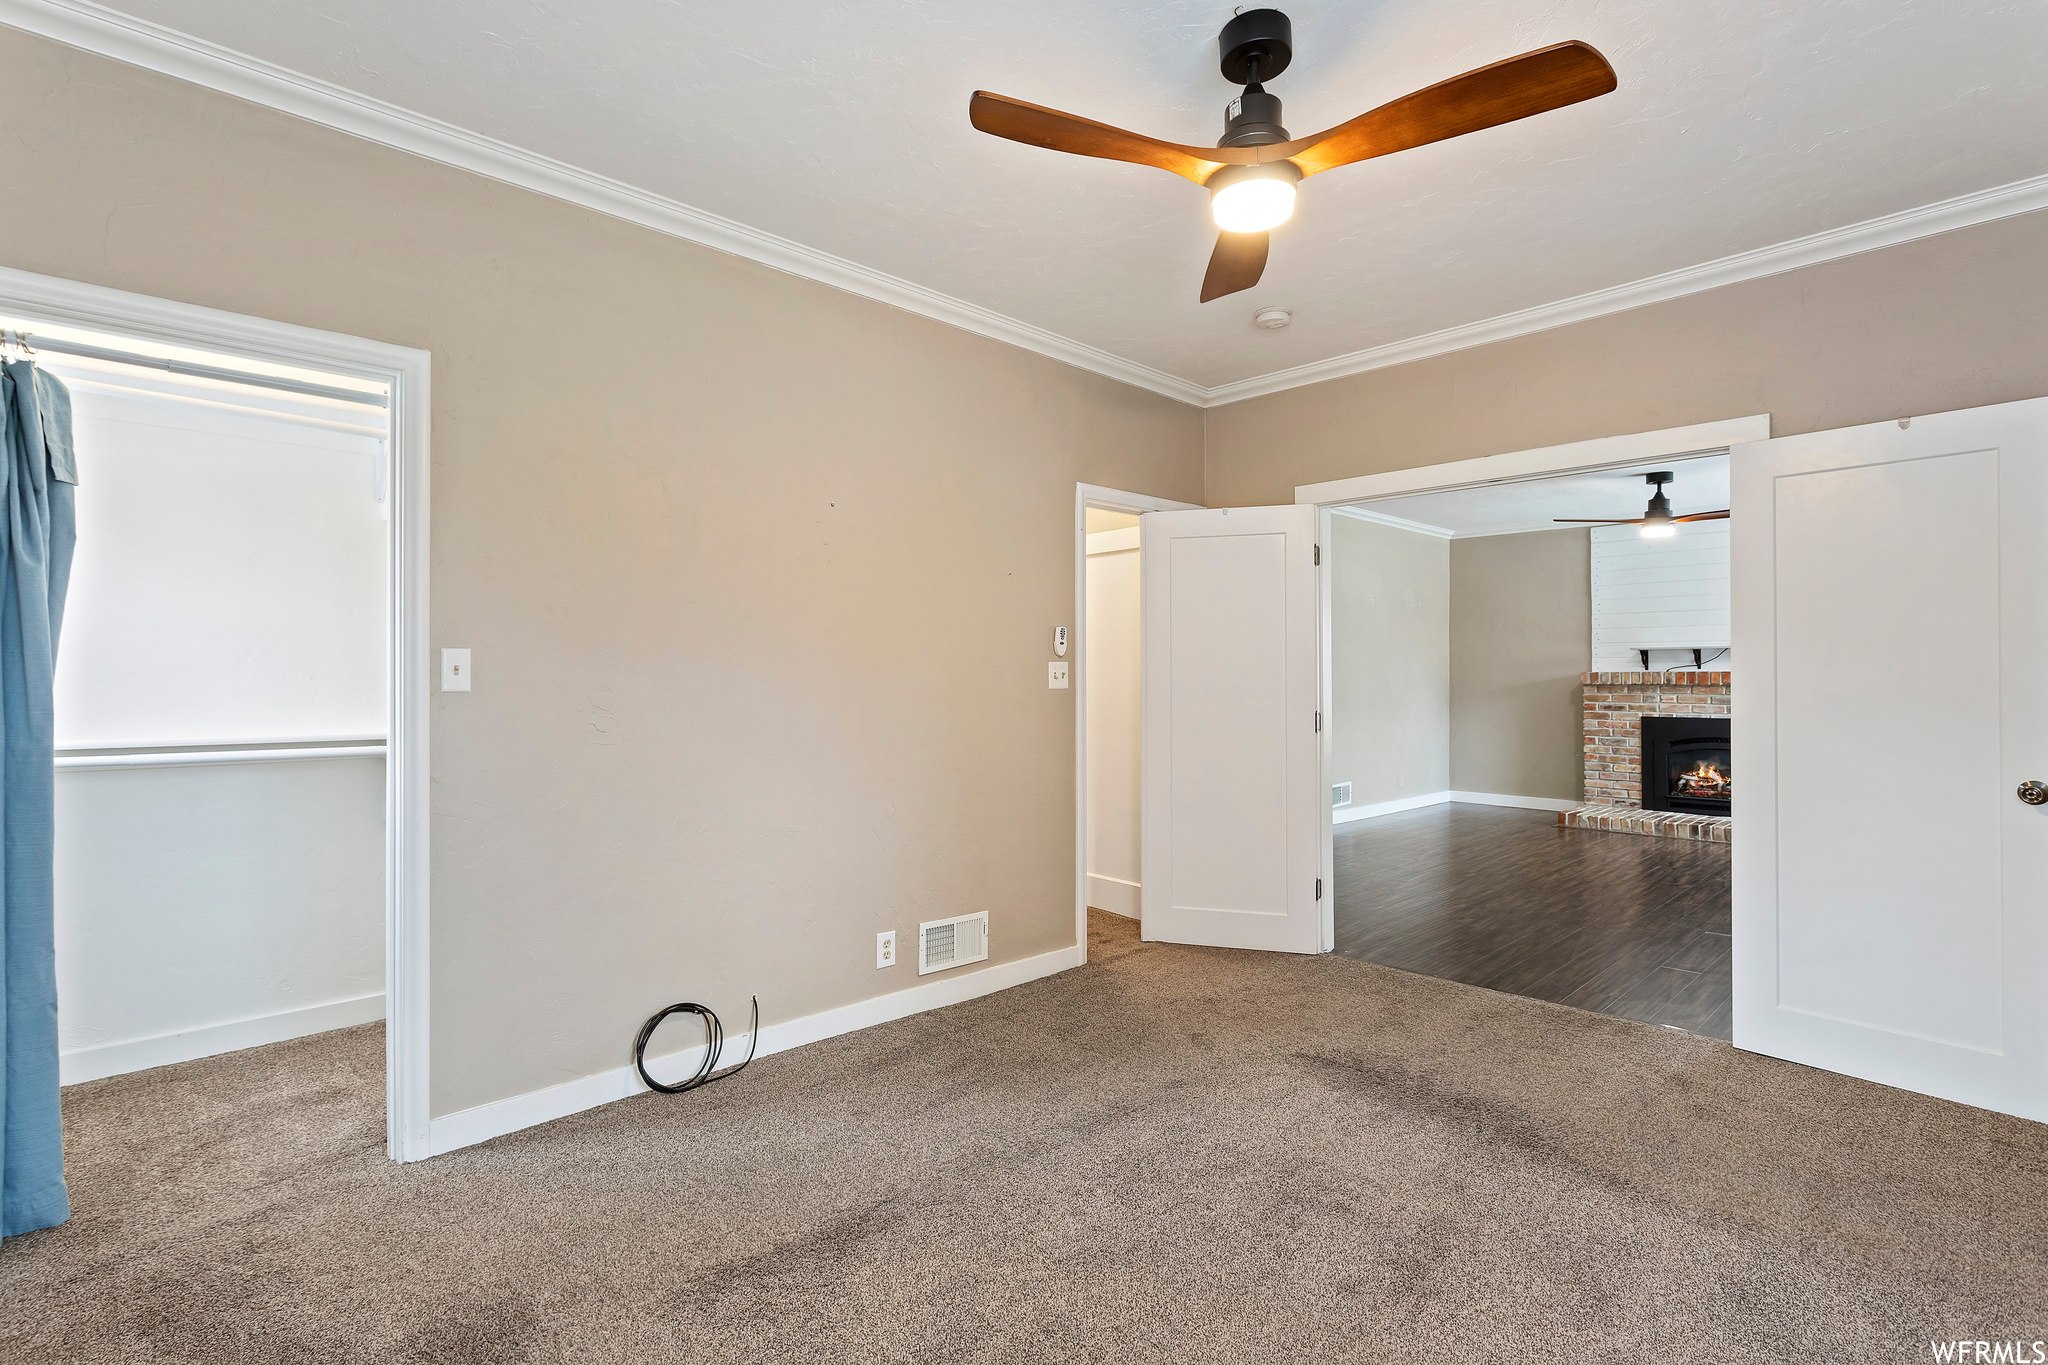 Unfurnished room featuring ornamental molding, ceiling fan, a fireplace, and carpet flooring